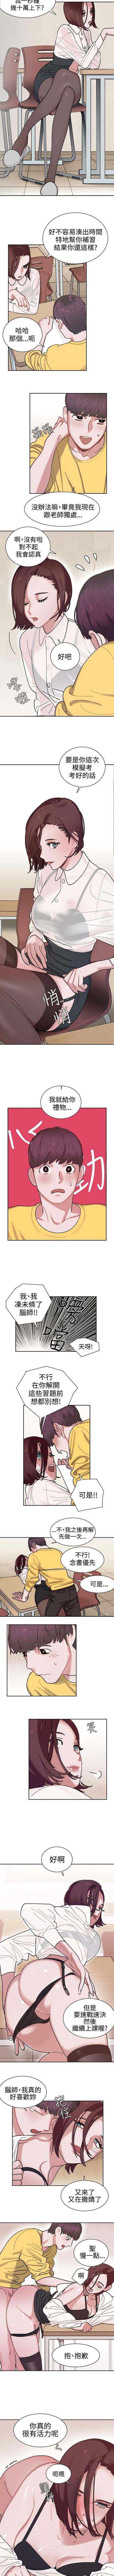 Gonzo 辣魅當家 1-46 Real Couple - Page 5